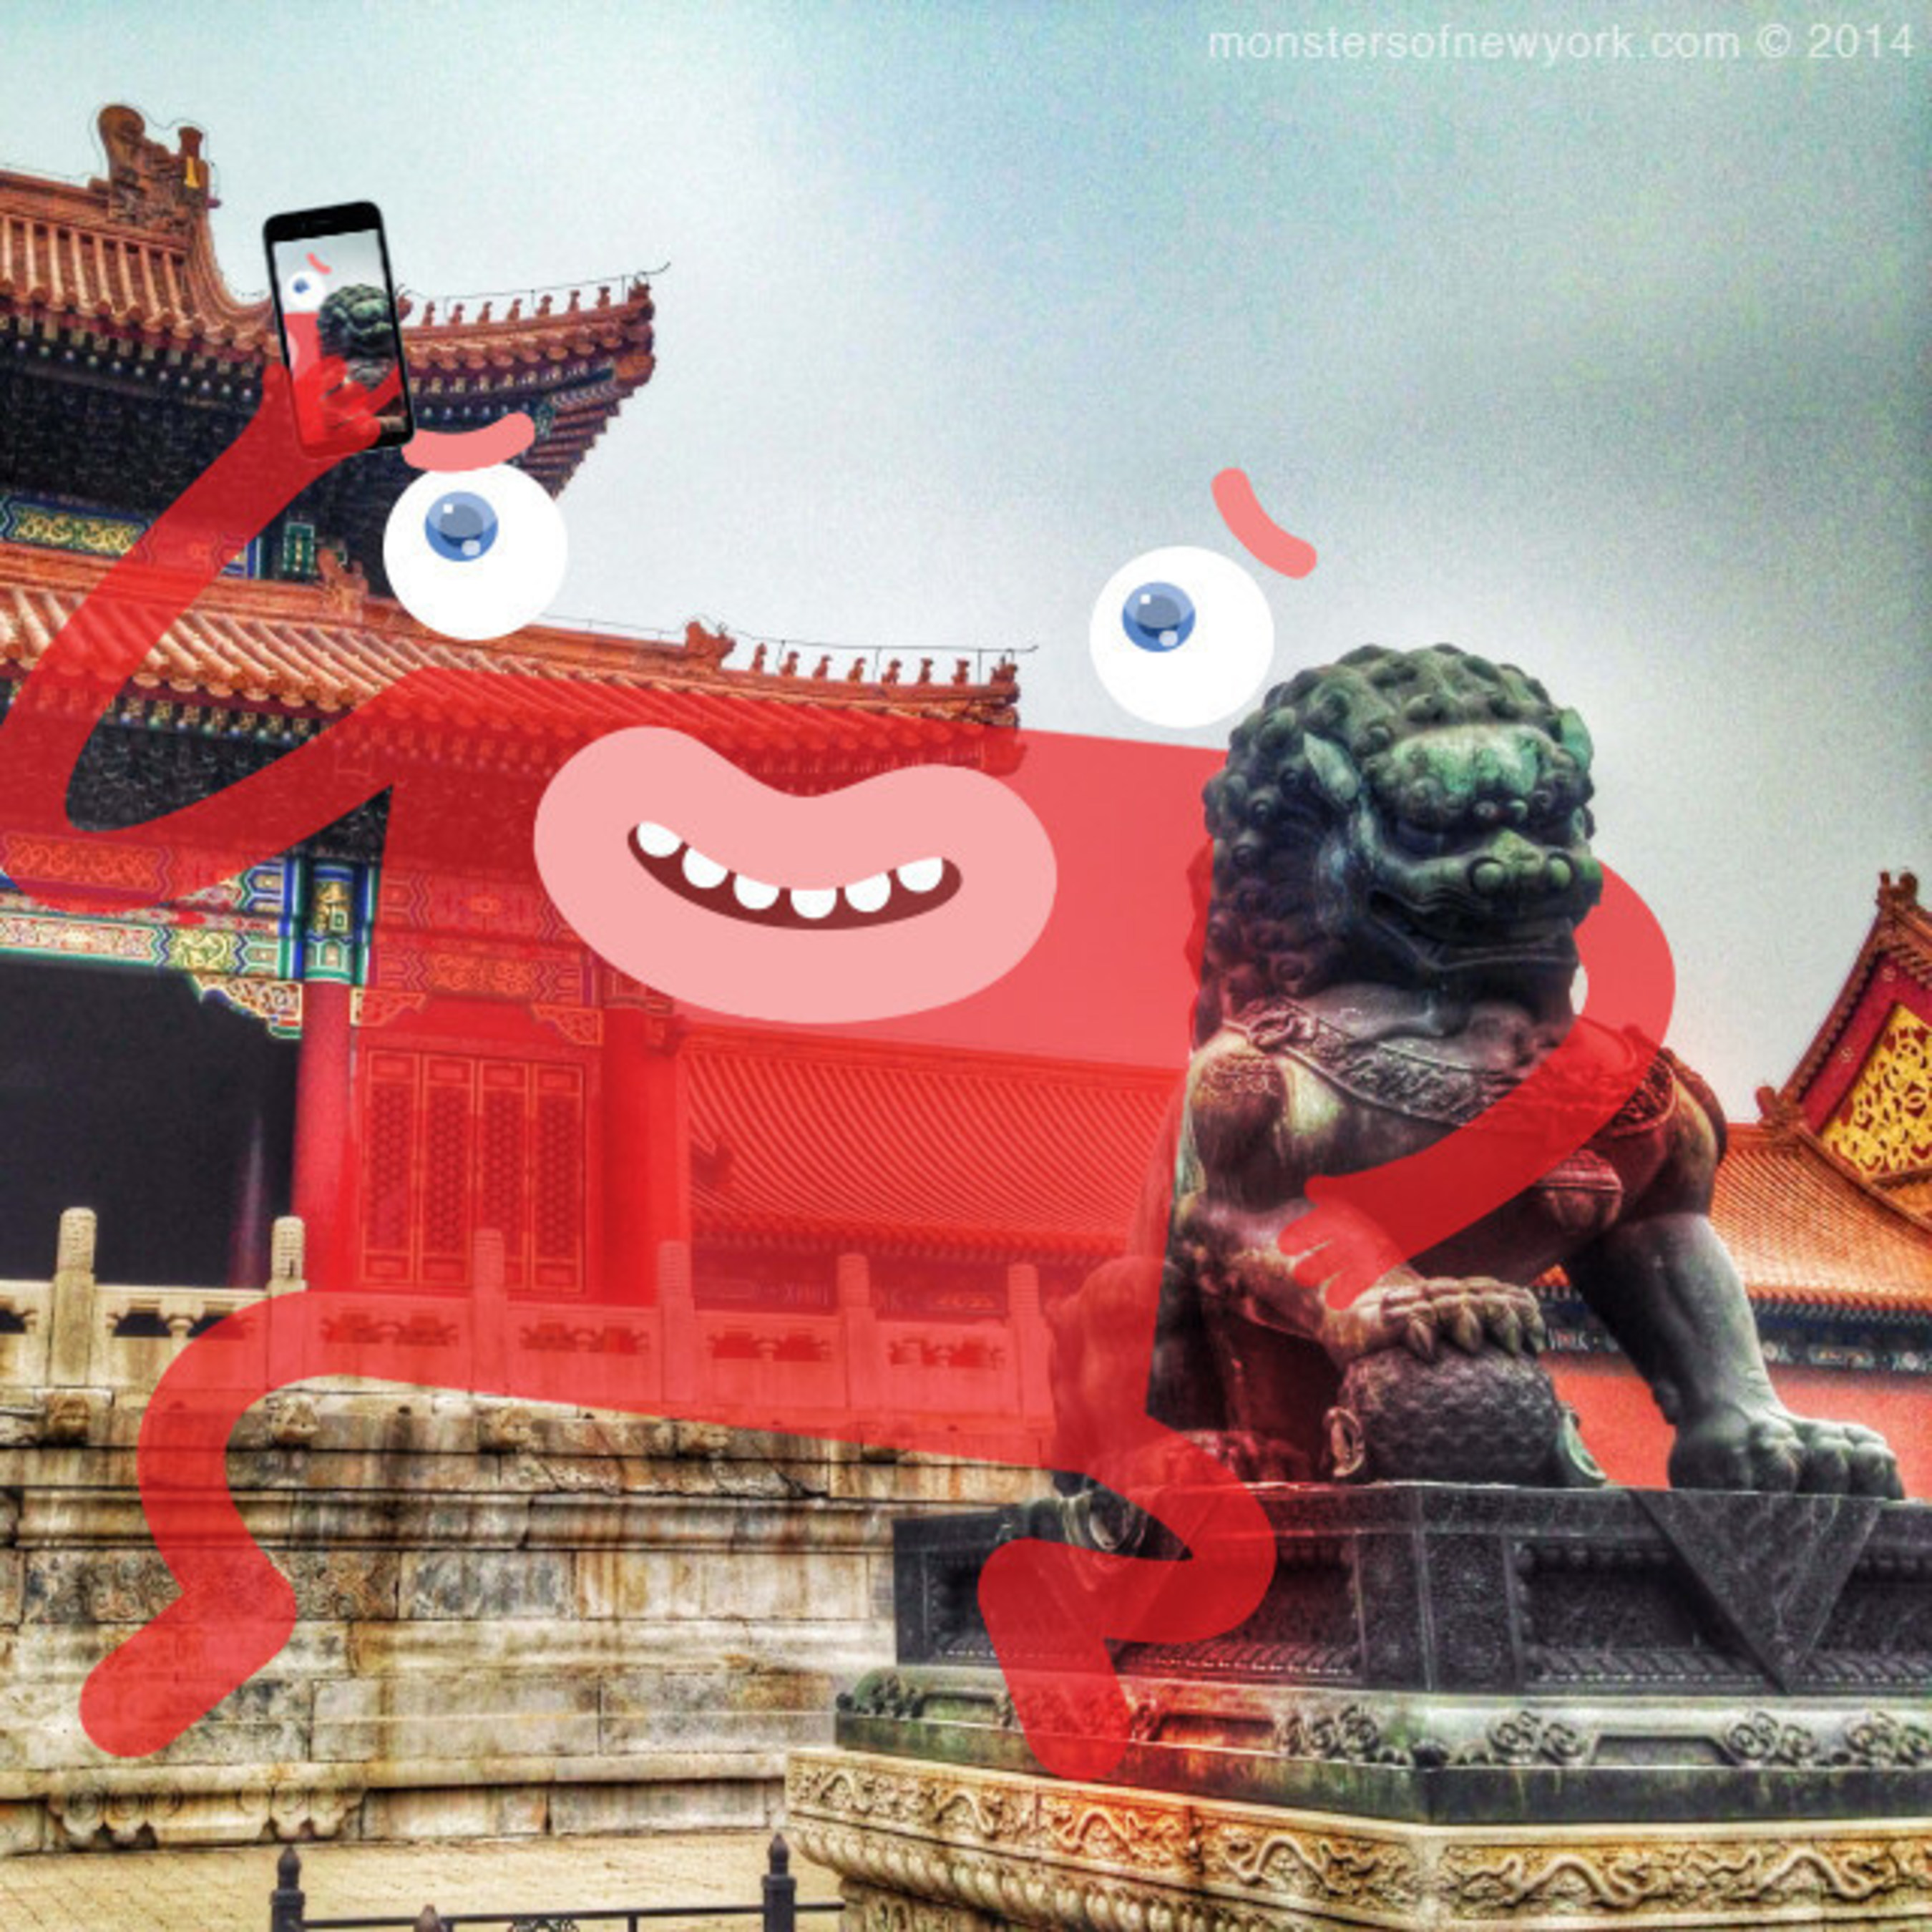 Monsters of New York's First Appearance in China at the Forbidden City